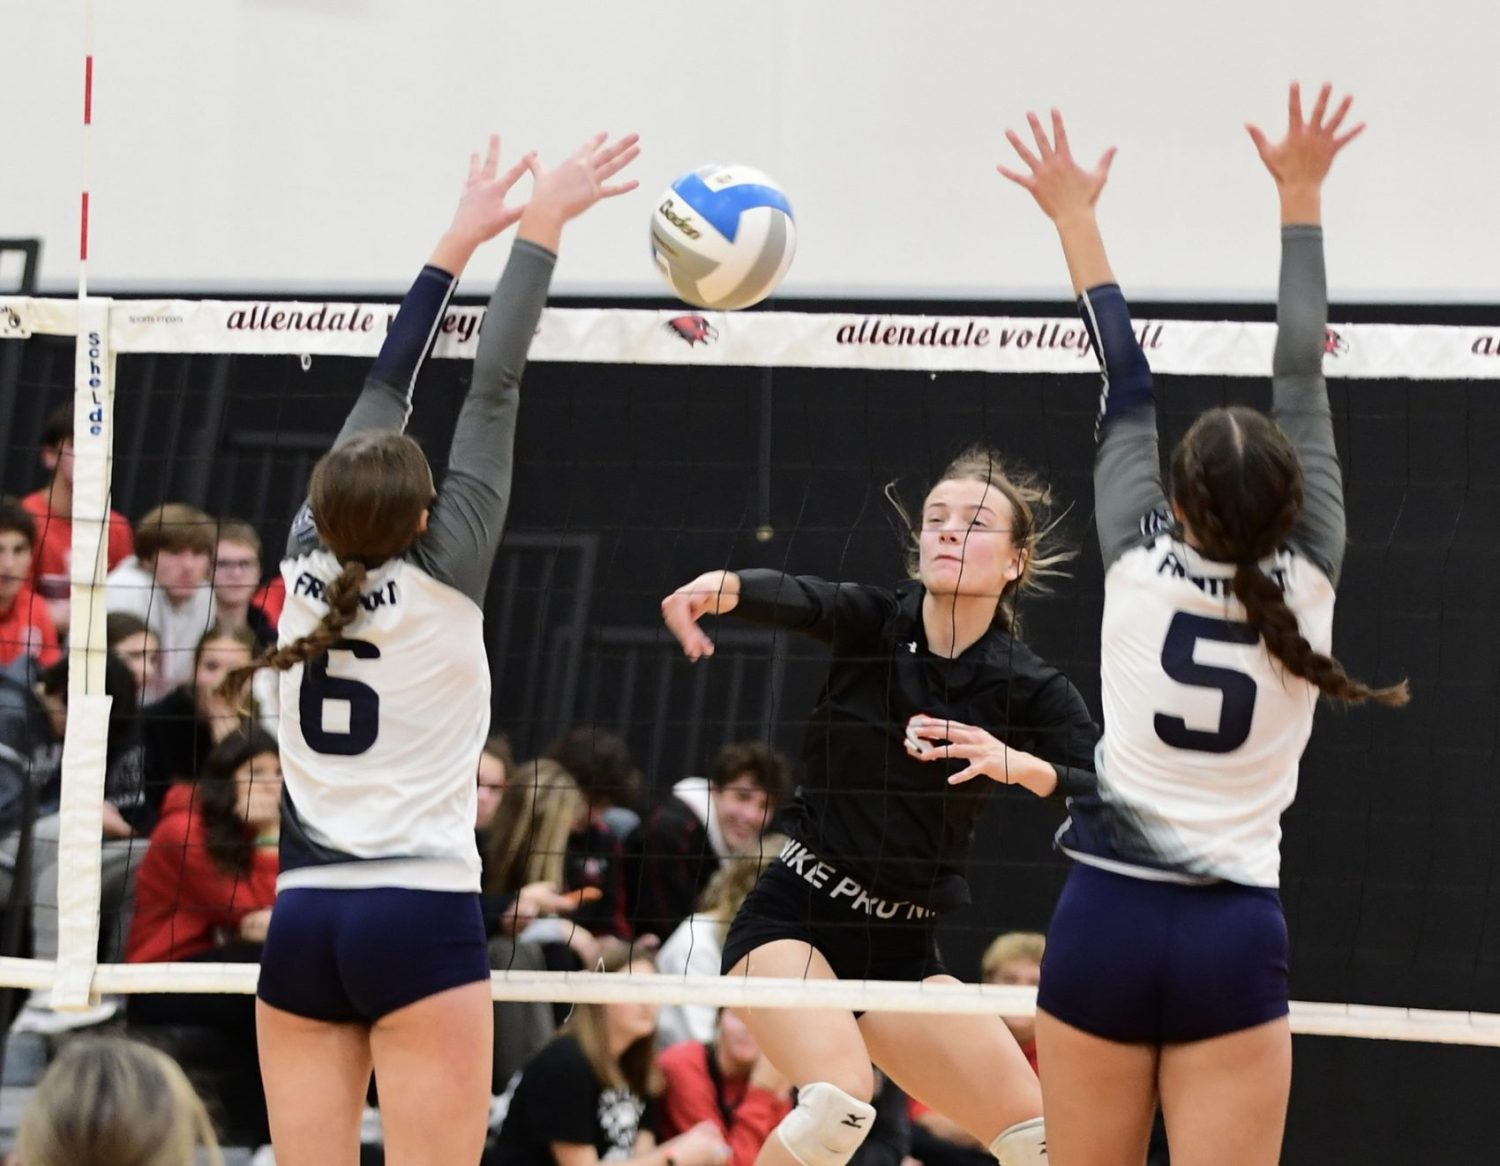 Here are the district volleyball scores from Thursday night